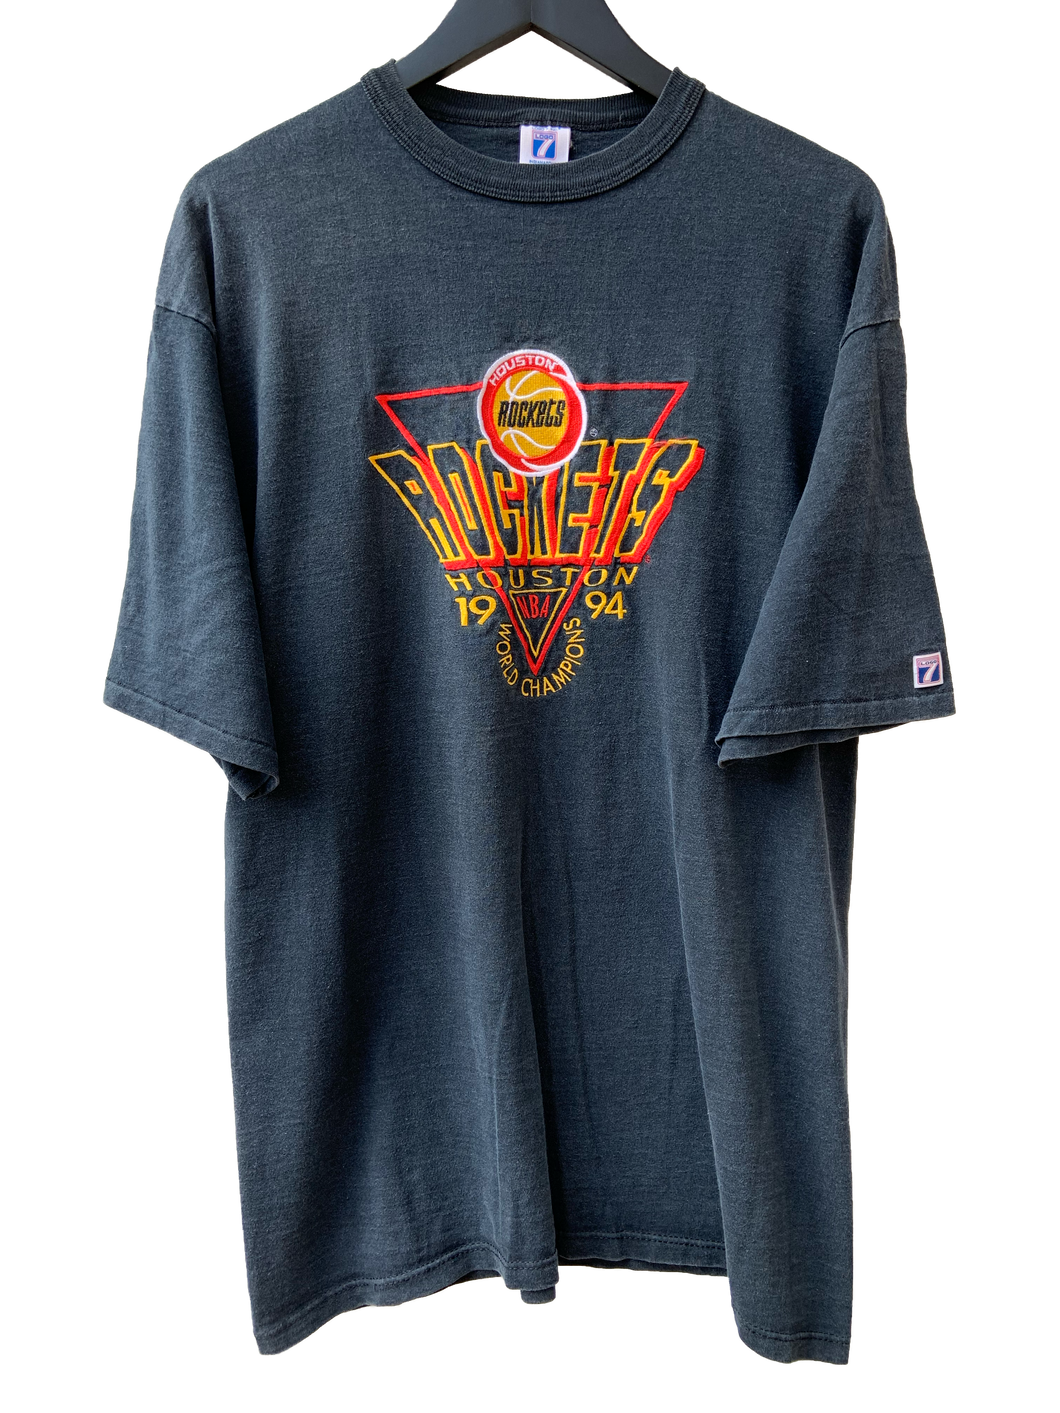 1994 HOUSTON ROCKETS EMBROIDED SS TEE - XL